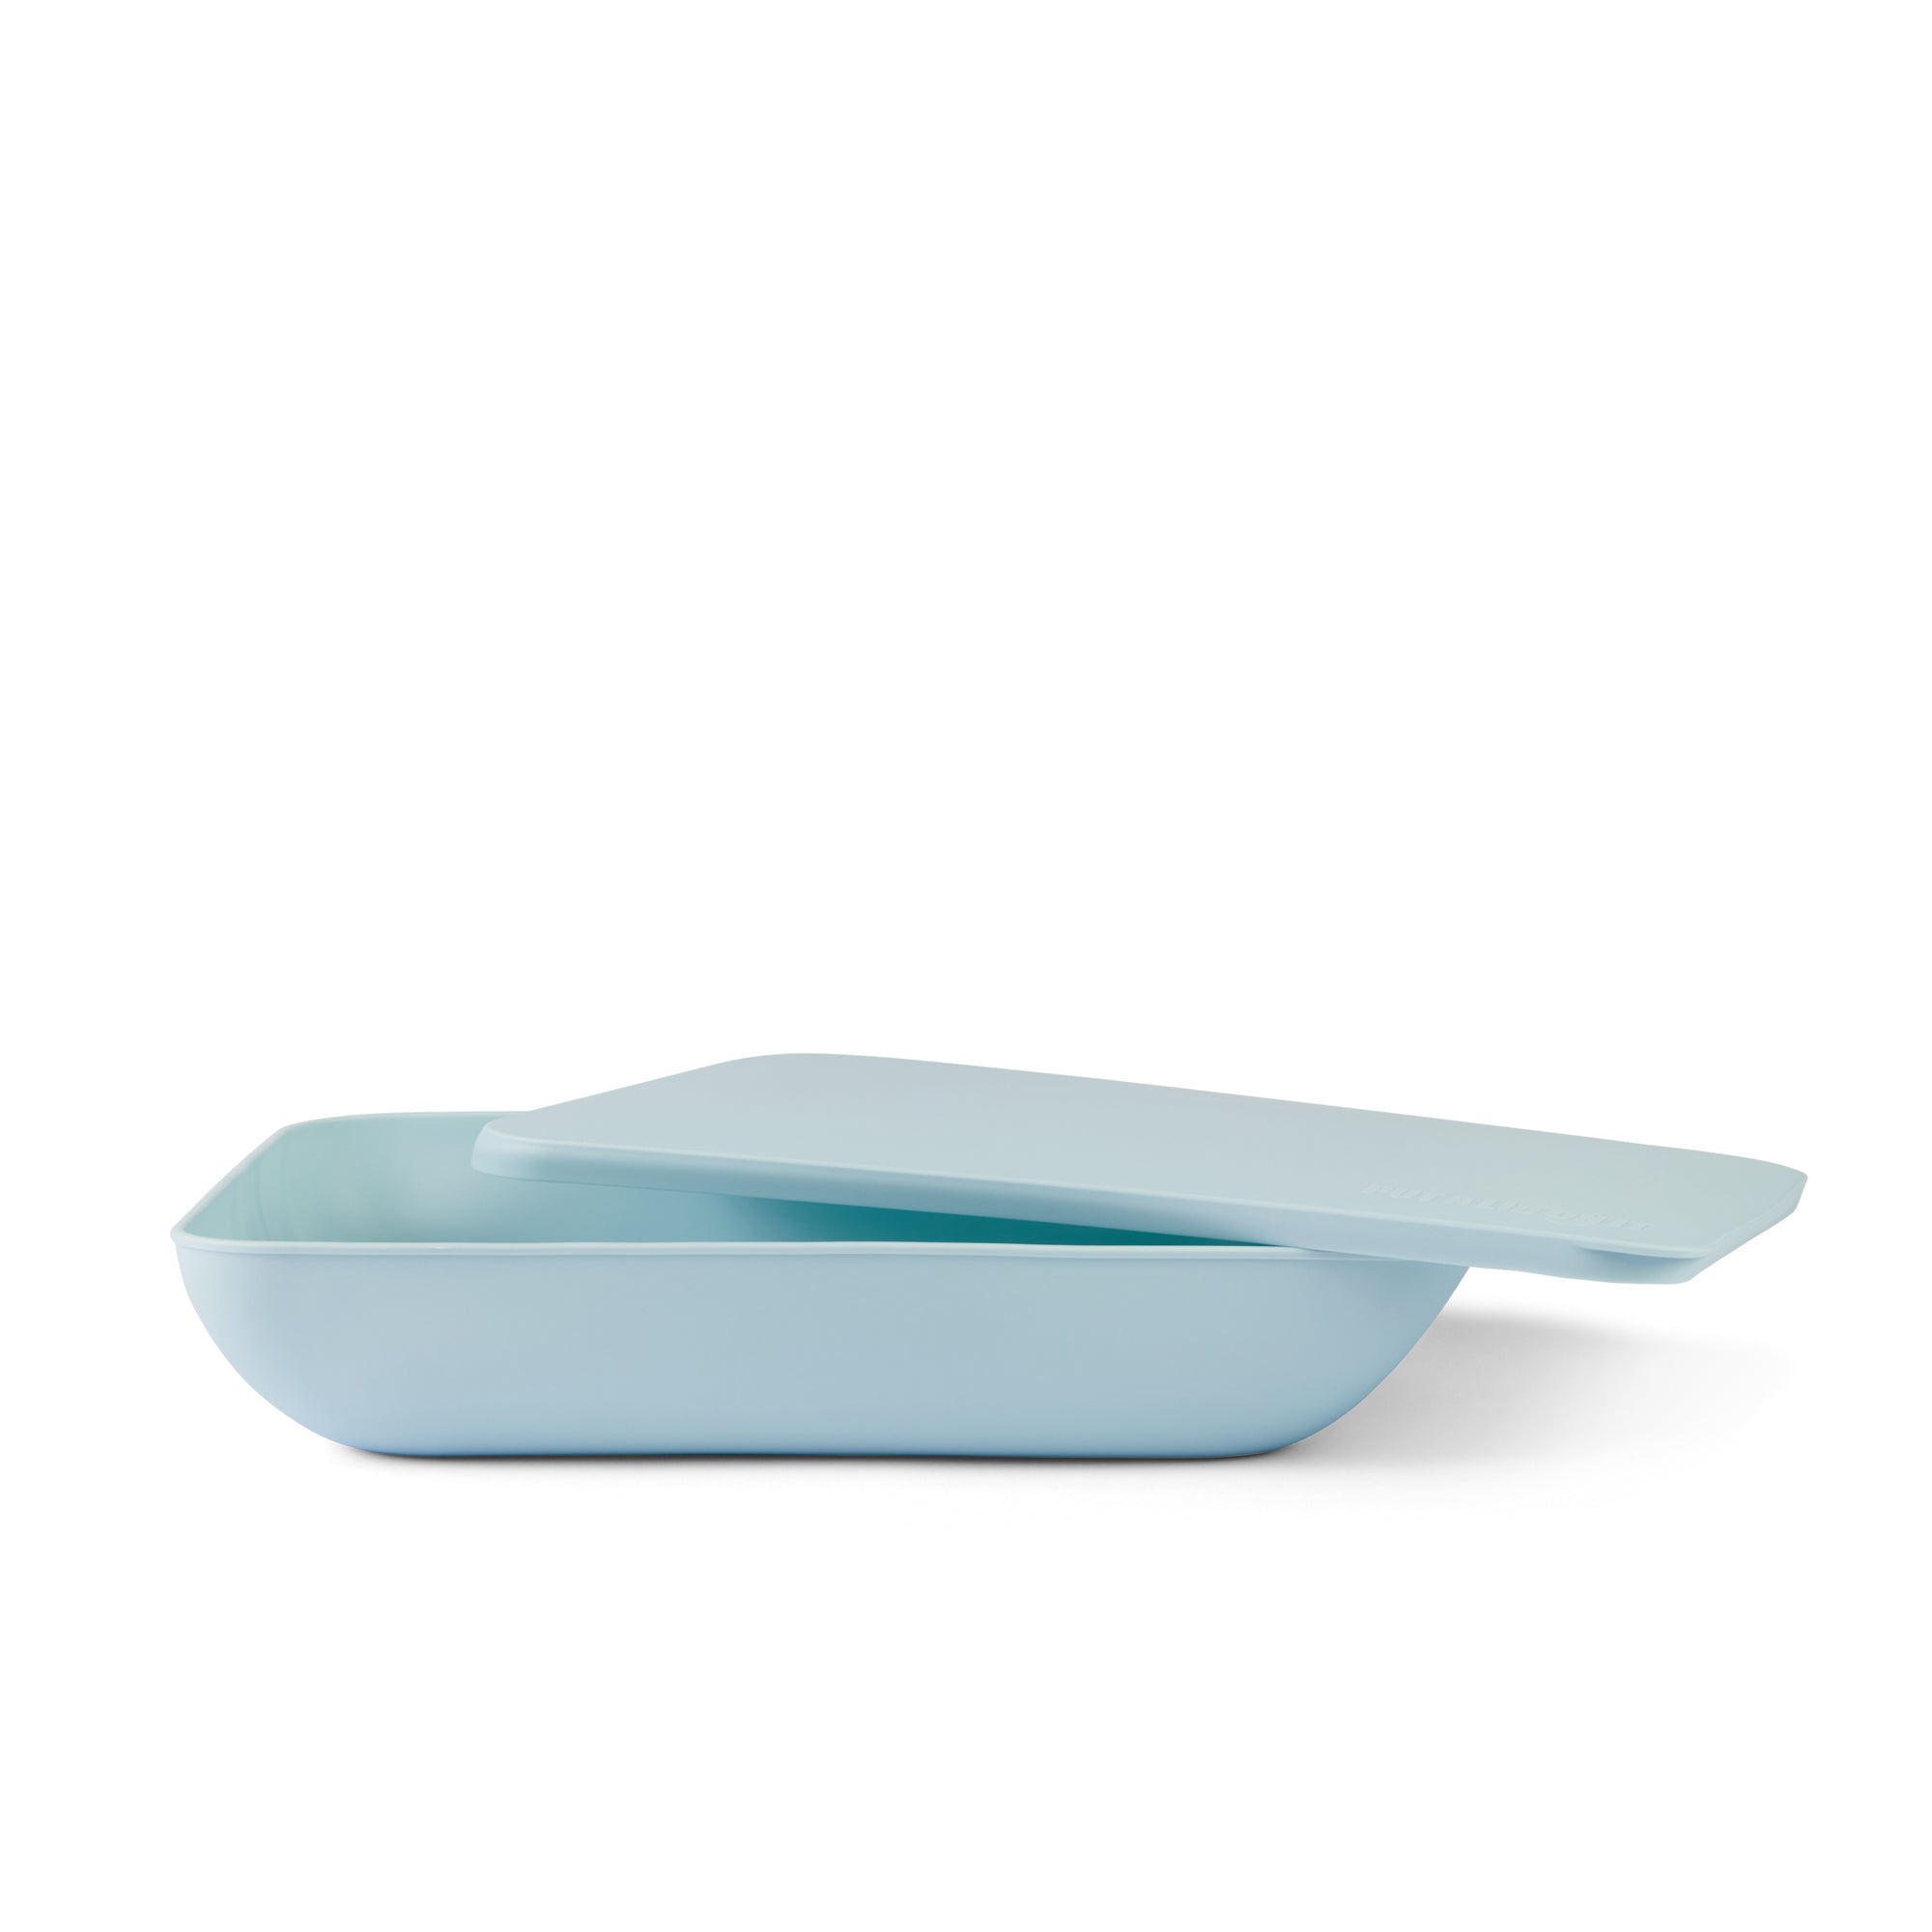 Put a lid on it - Serving platter with a lid -Blueberry